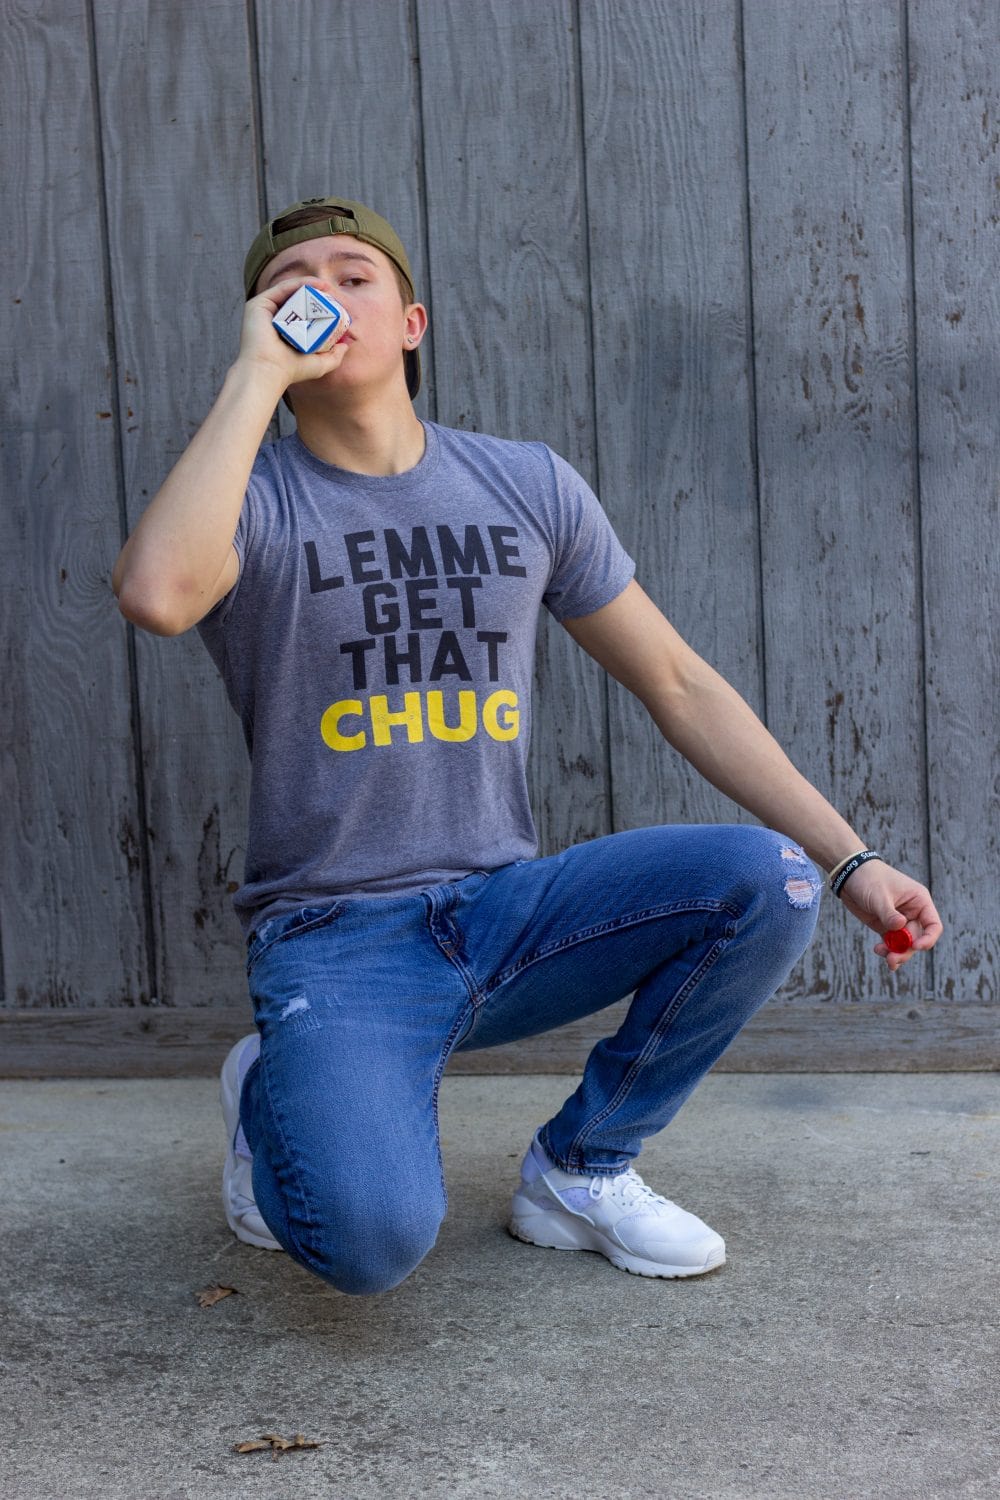 Funny Gaming T-Shirts Based on Things Said in Fortnite - "Lemme Get That Chug"